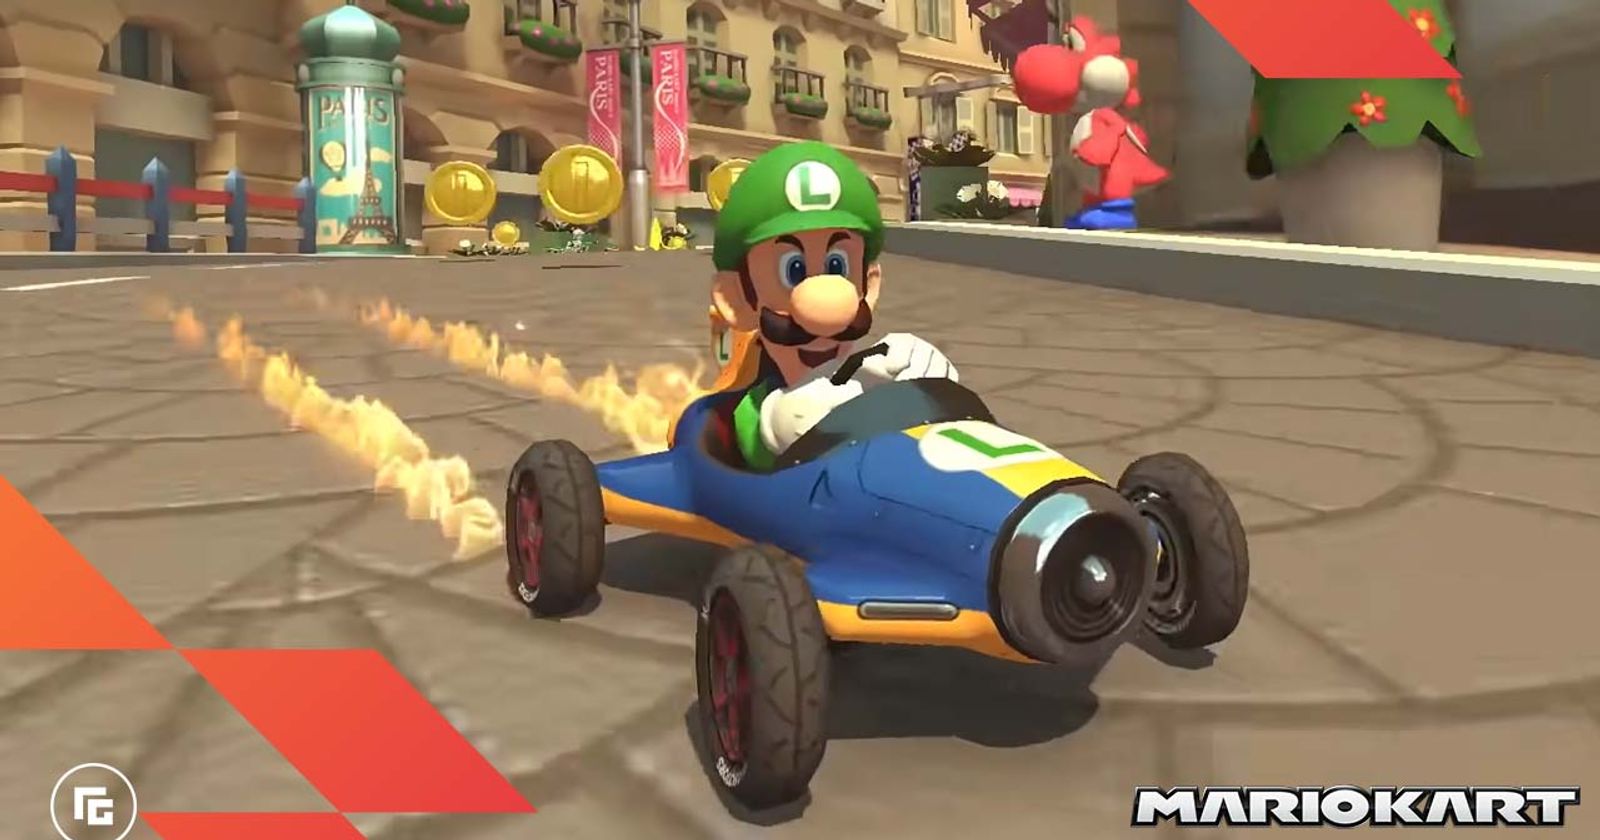 You don't need Mario Kart 8 Deluxe's DLC to race the new tracks